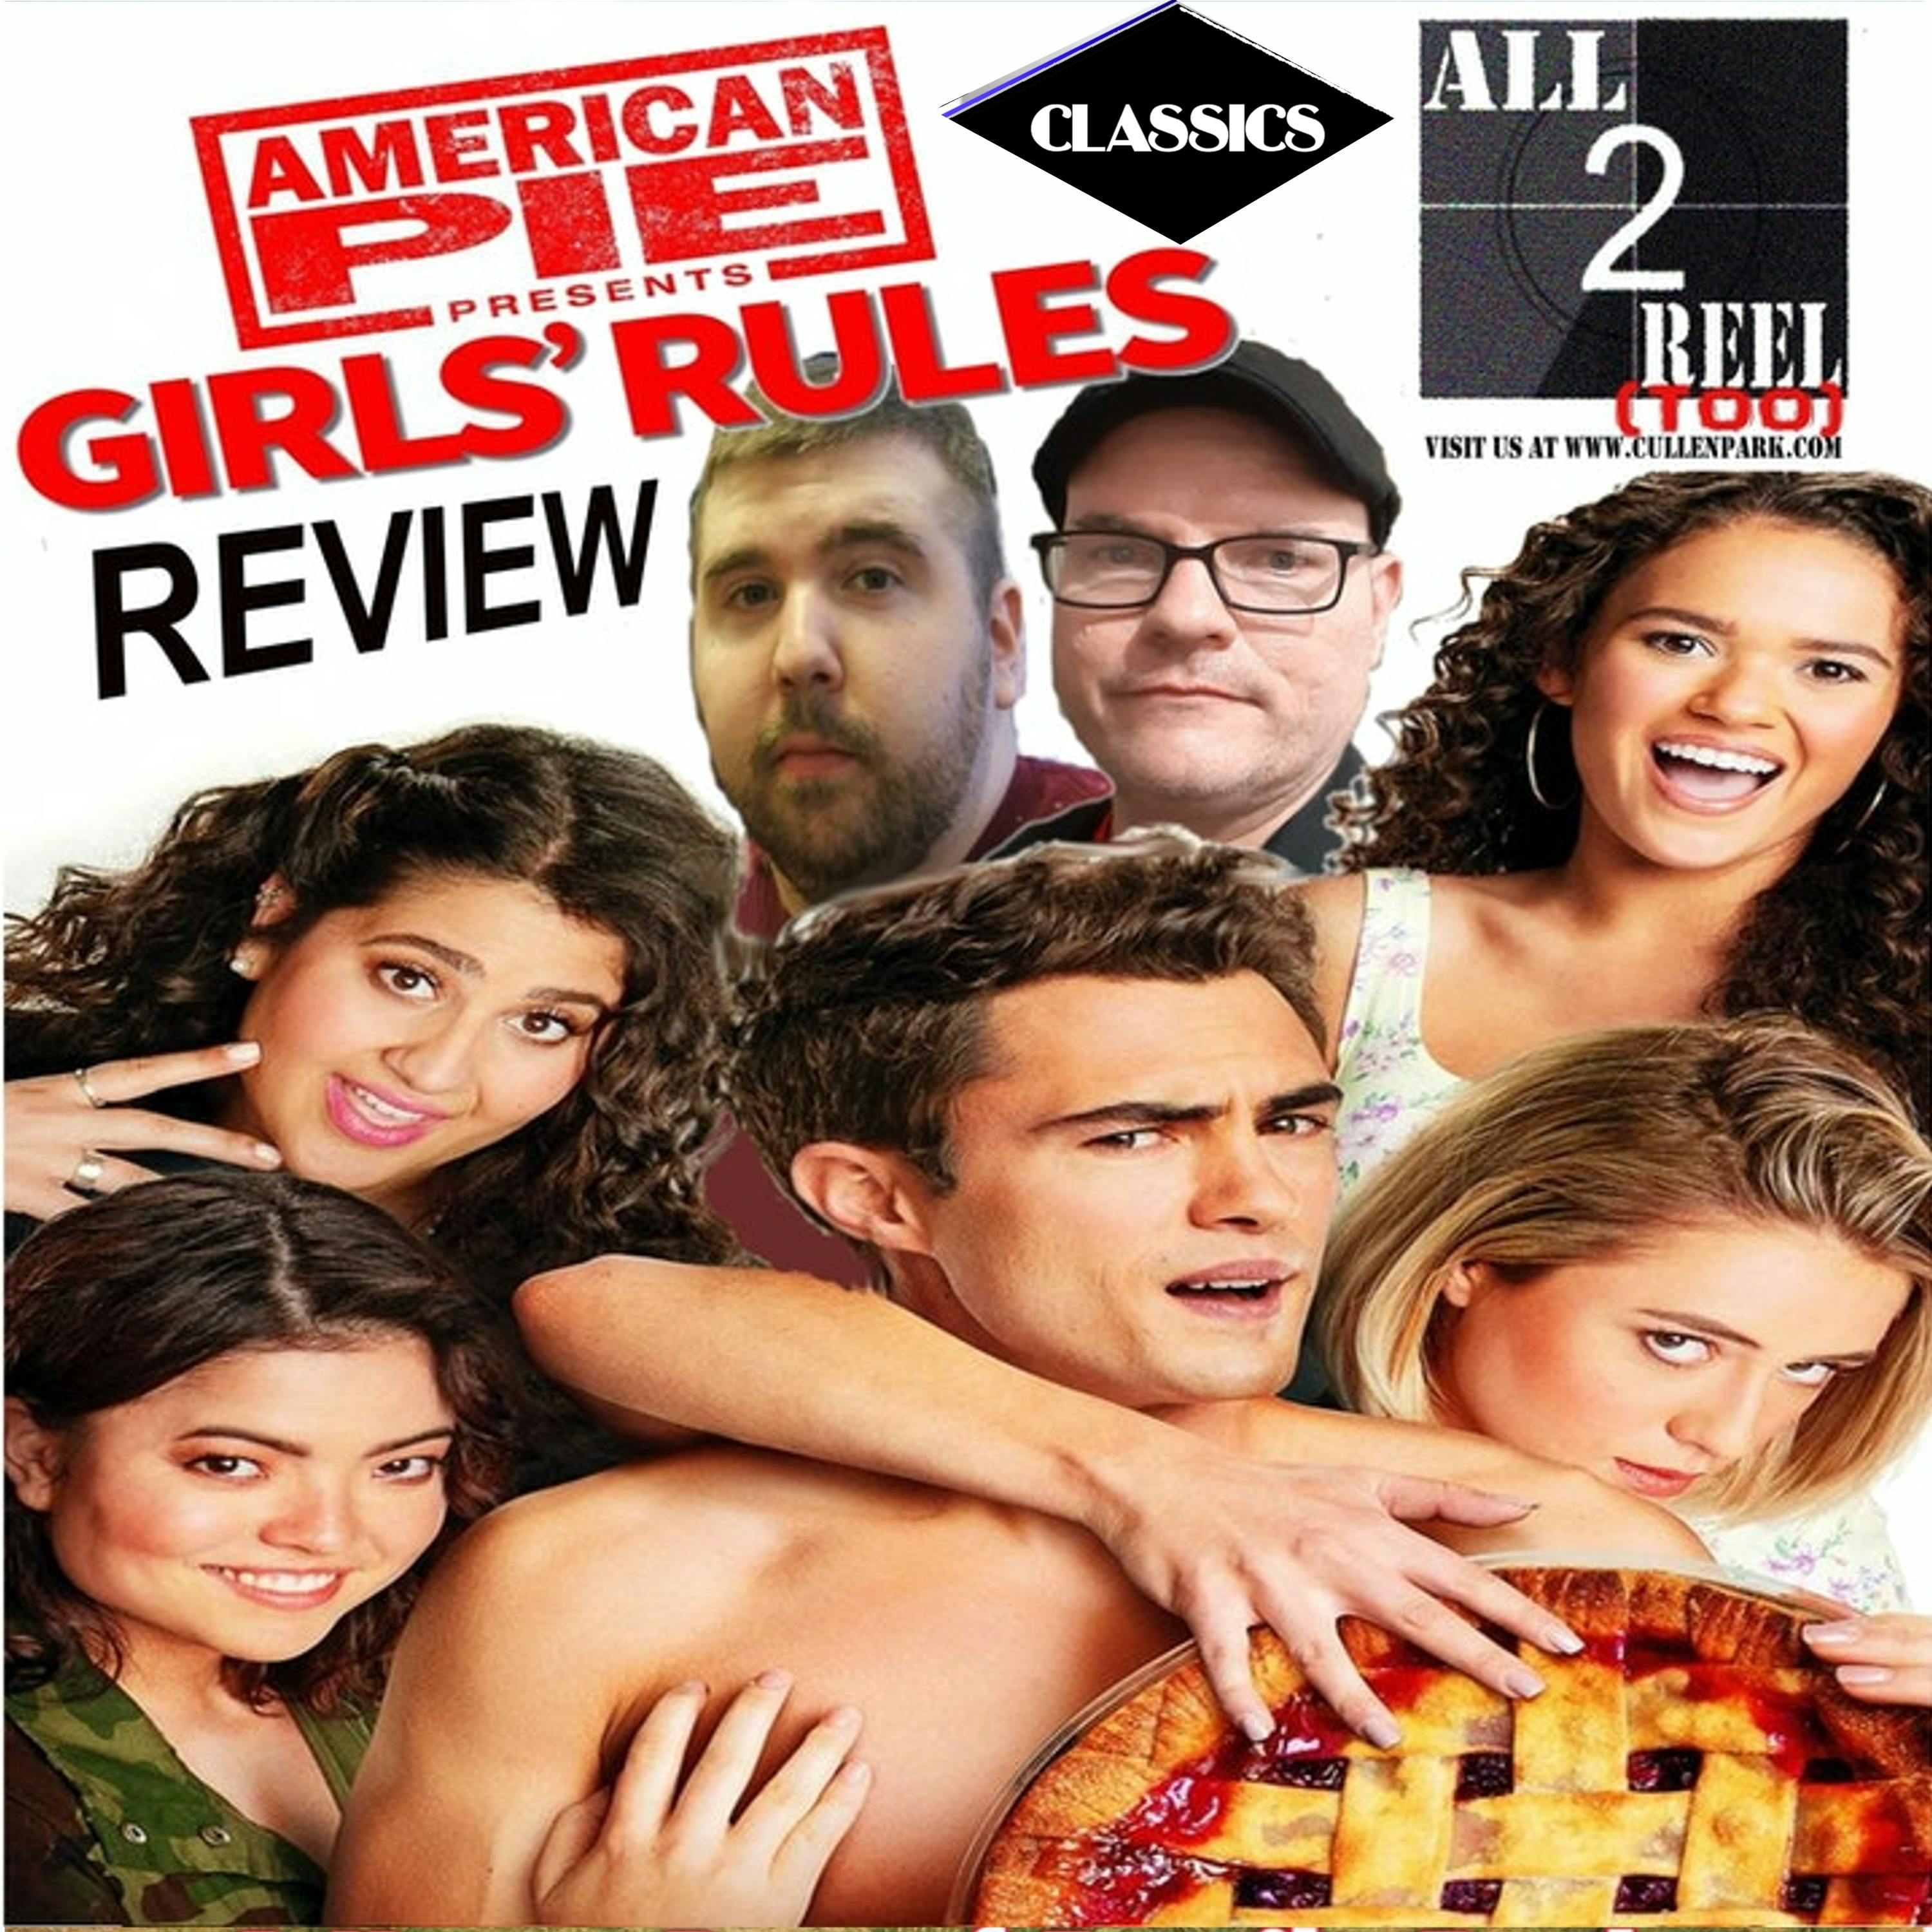 ALL2REELTOO CLASSICS -American Pie Presents: Girls’ Rules (2020)  - Direct from Hell